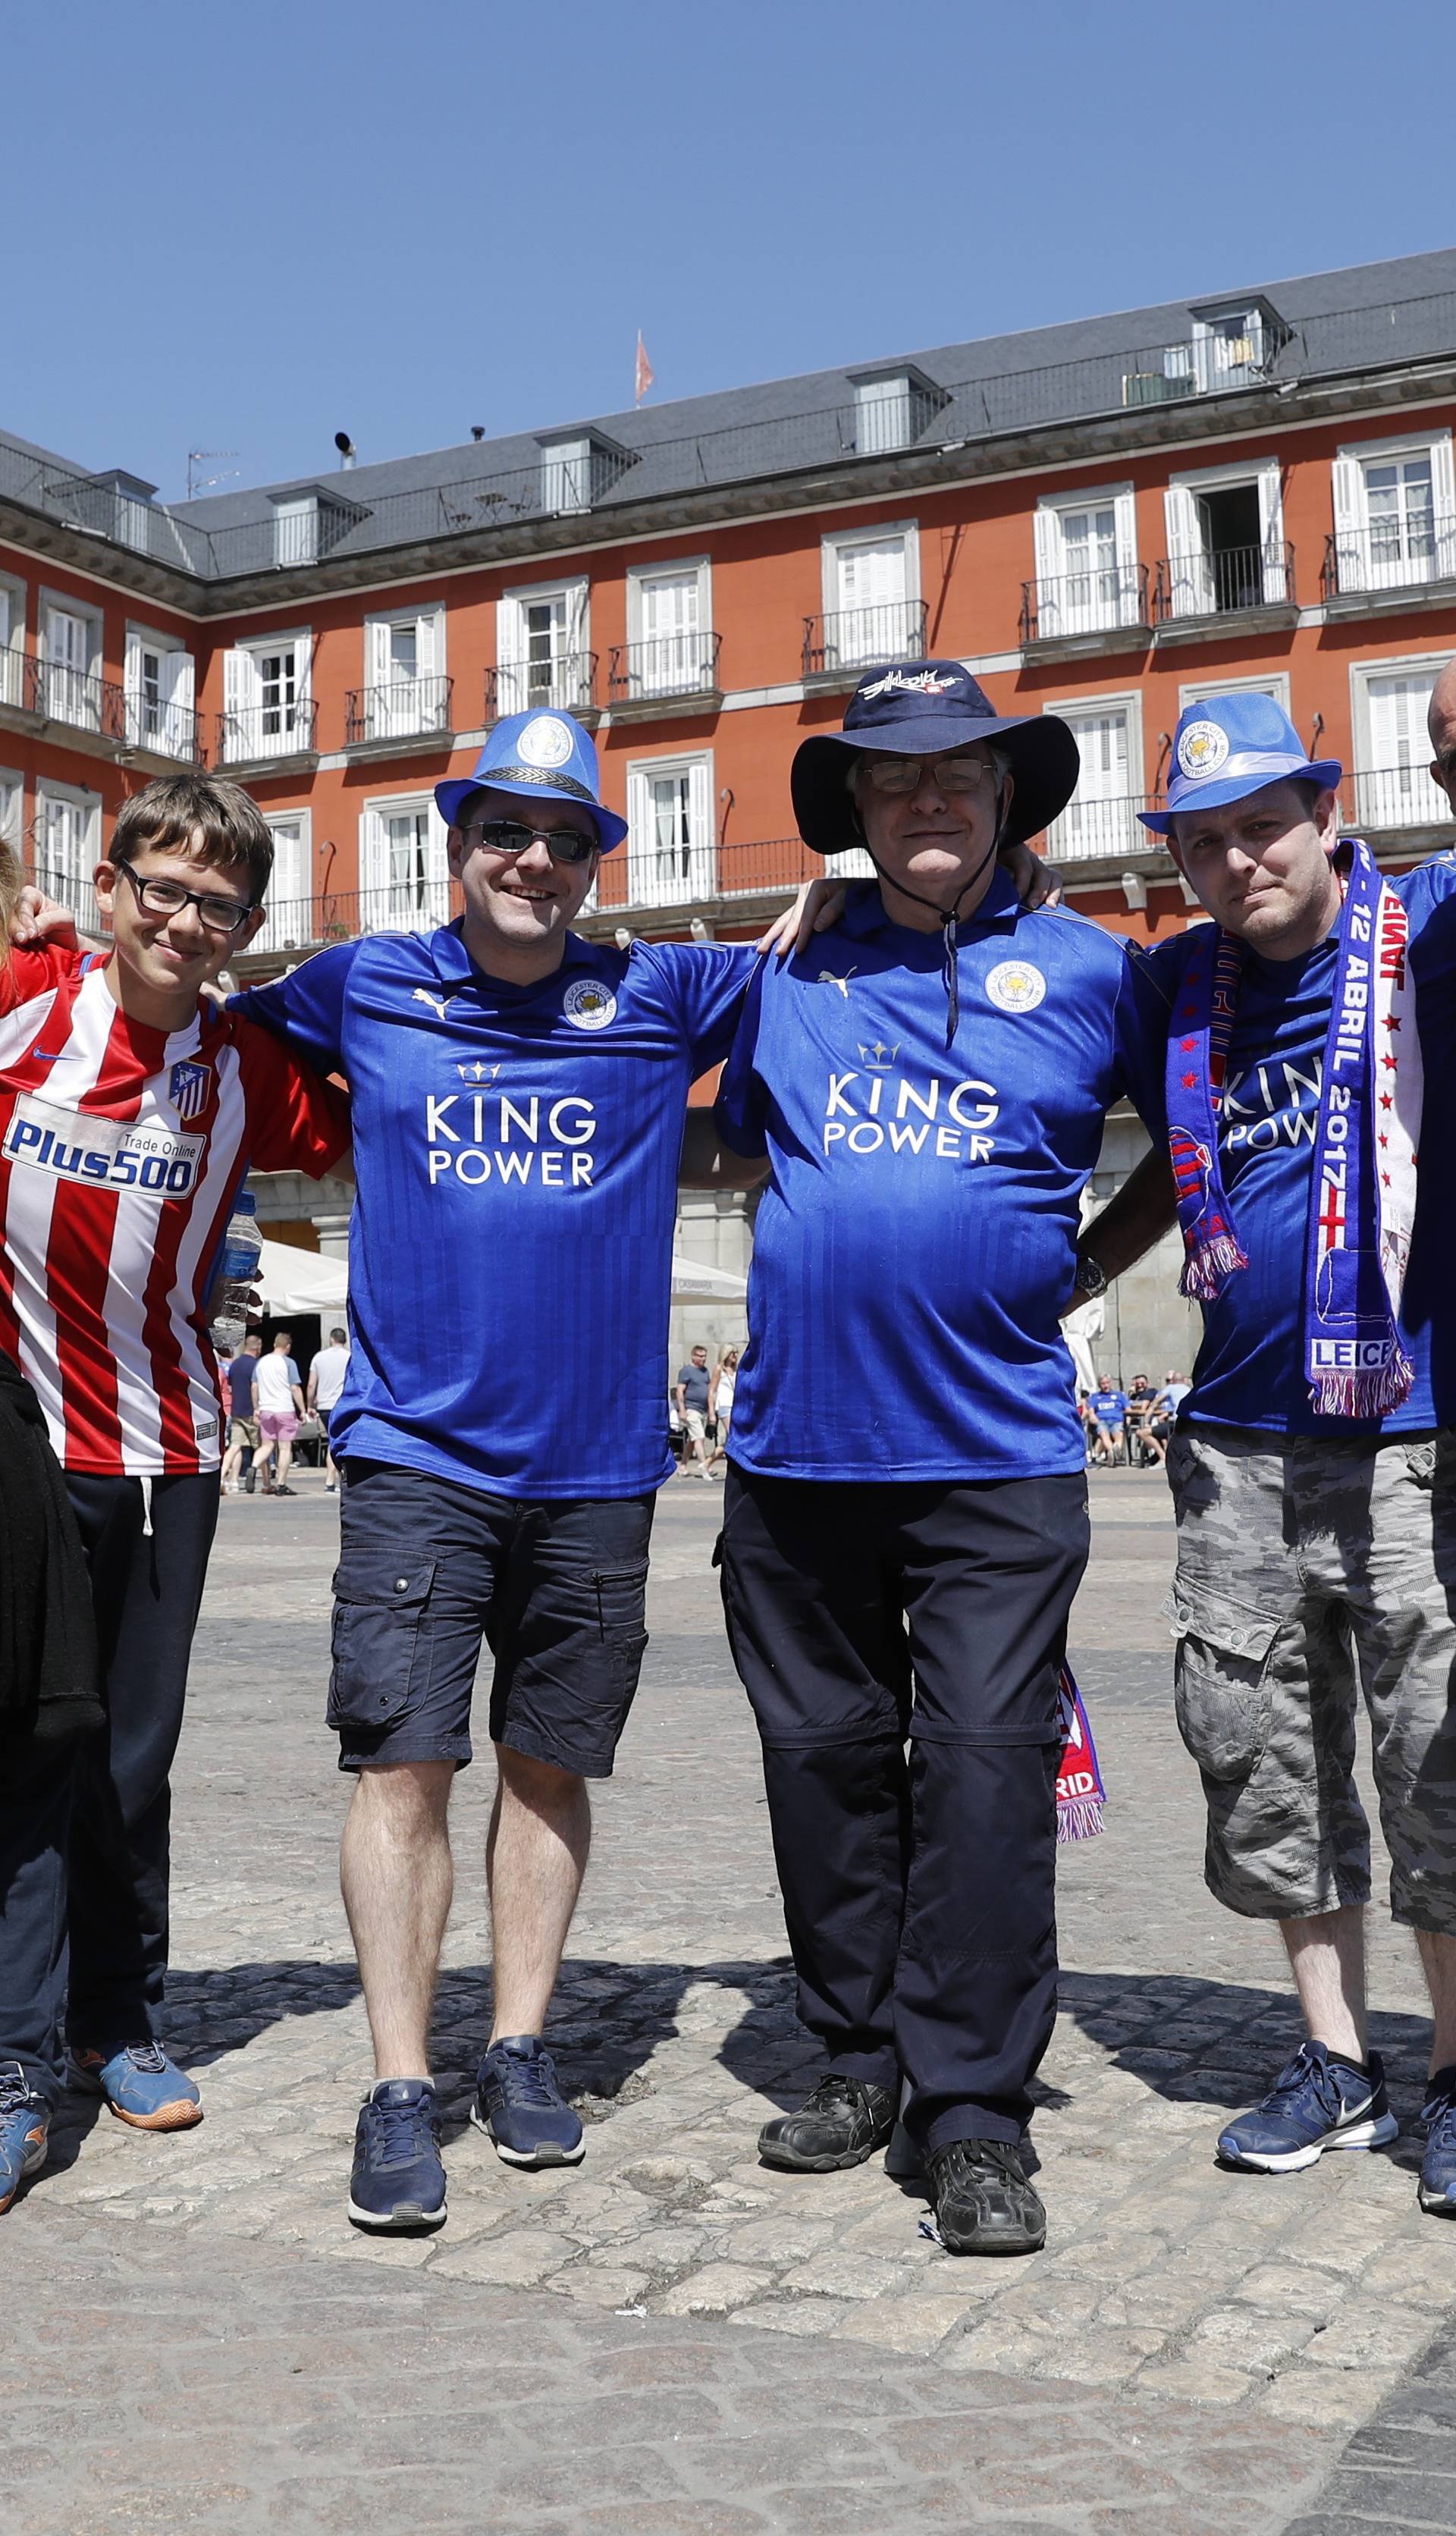 Atletico Madrid fans and Leicester fans pose for a photo as they meet in the Plaza Mayor before the match